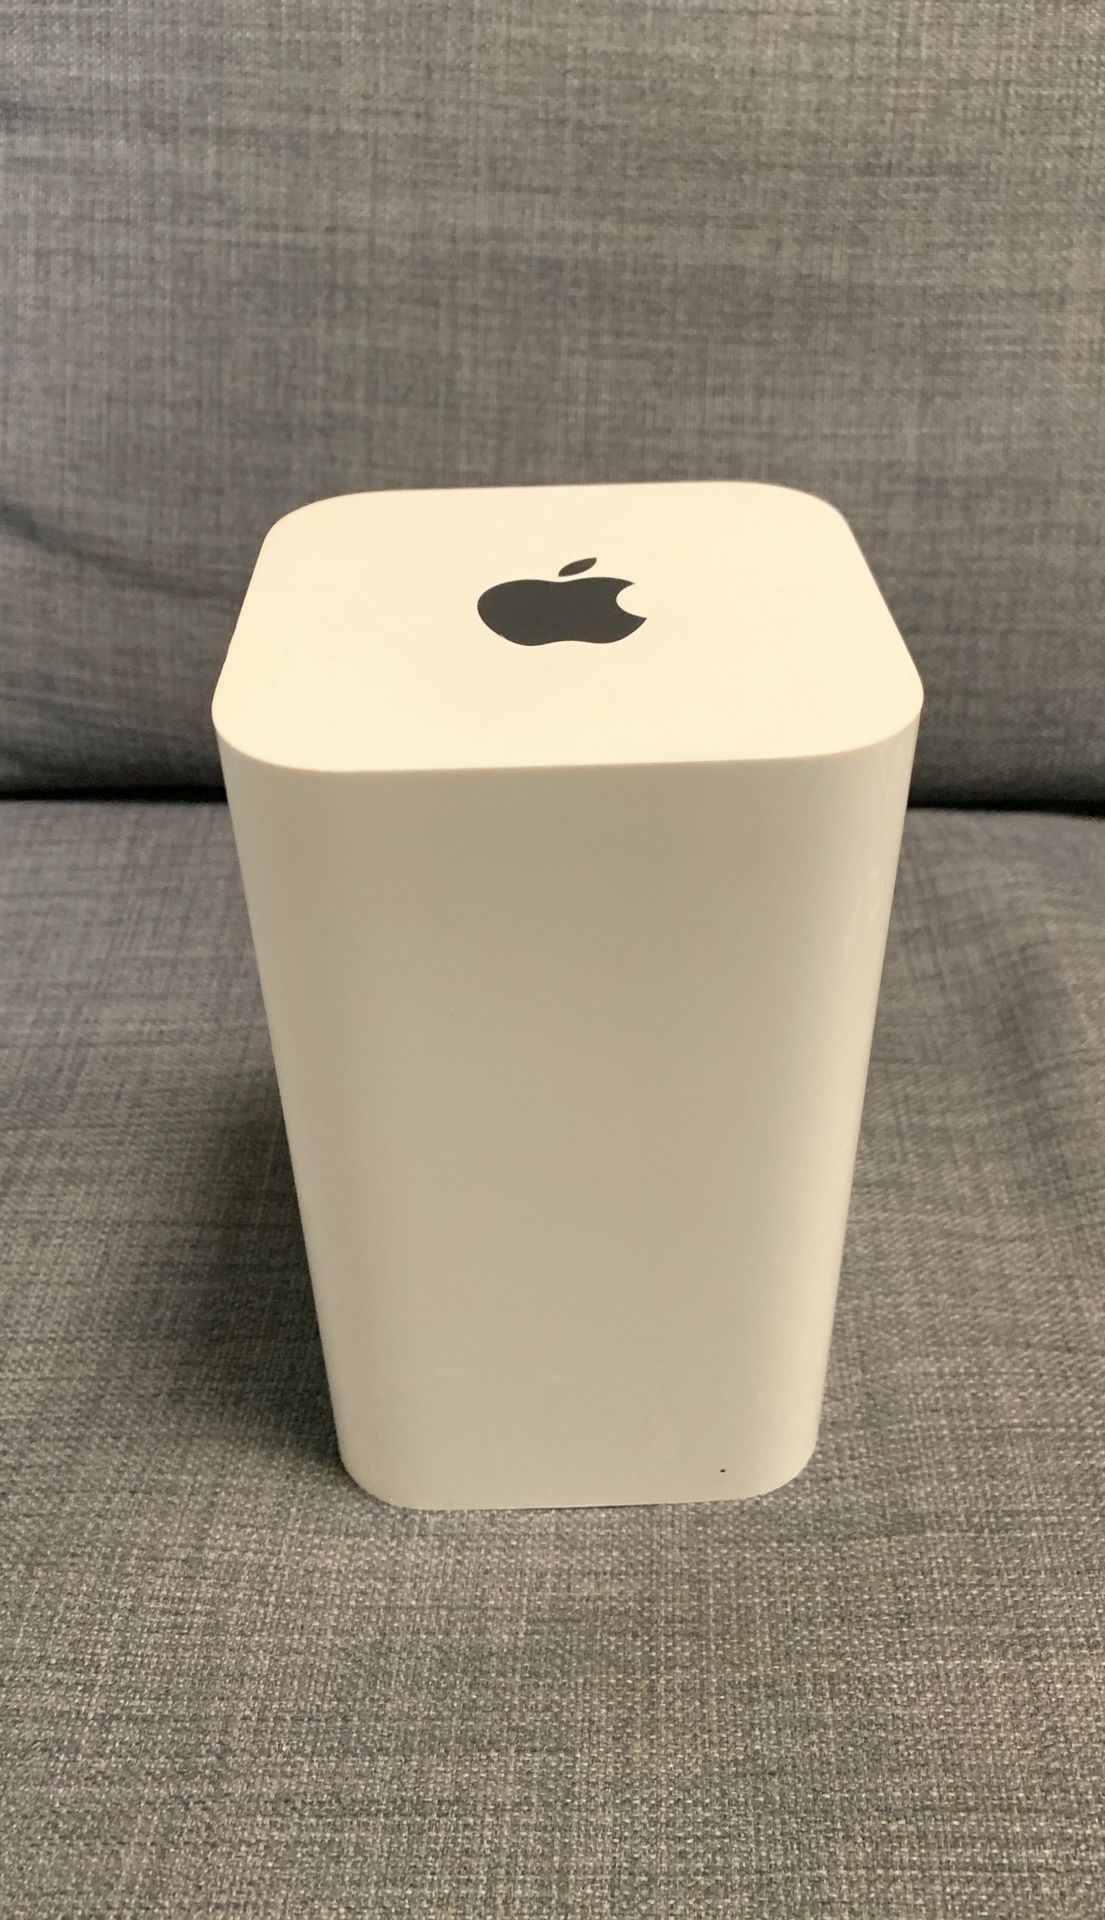 Apple AirPort Extreme Wireless WiFi Router